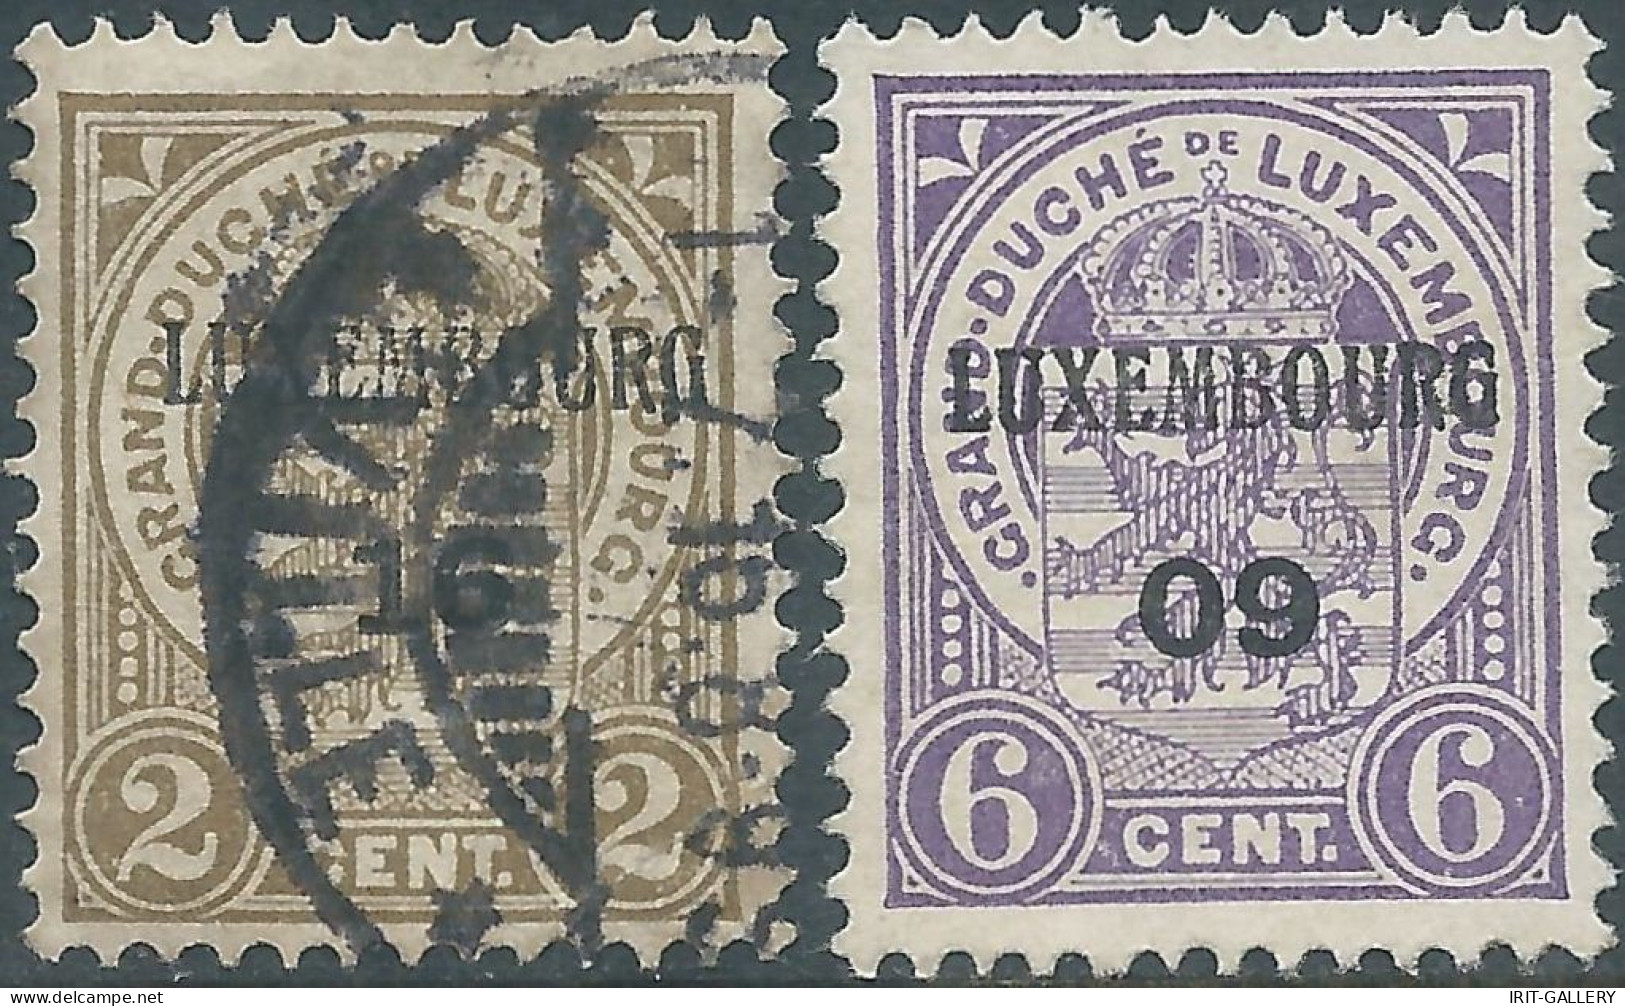 Lussemburgo - Luxembourg - 1912 Coat Of Arms,Overprinted On 2C Obliterated  & 6C Mint - 1907-24 Ecusson